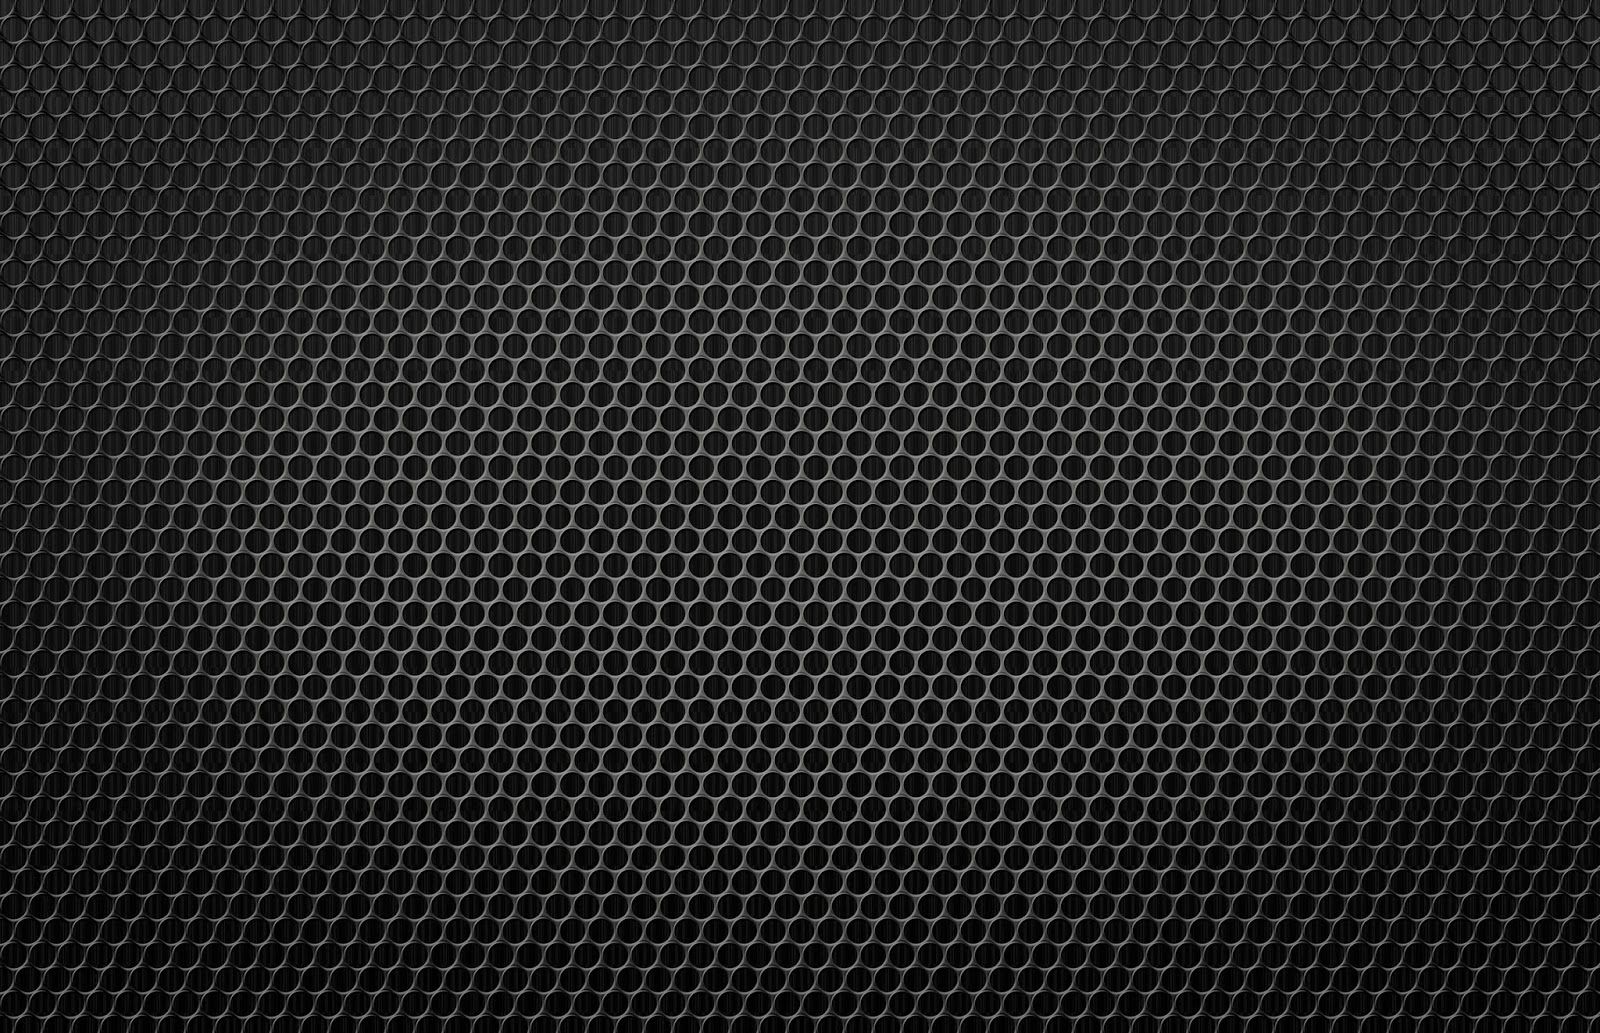 Free download black graphics BG textured HD wallpaper designs for mobile desktop [1600x1033] for your Desktop, Mobile & Tablet. Explore Black Graphic Wallpaper. Black Design Background Wallpaper, Black and